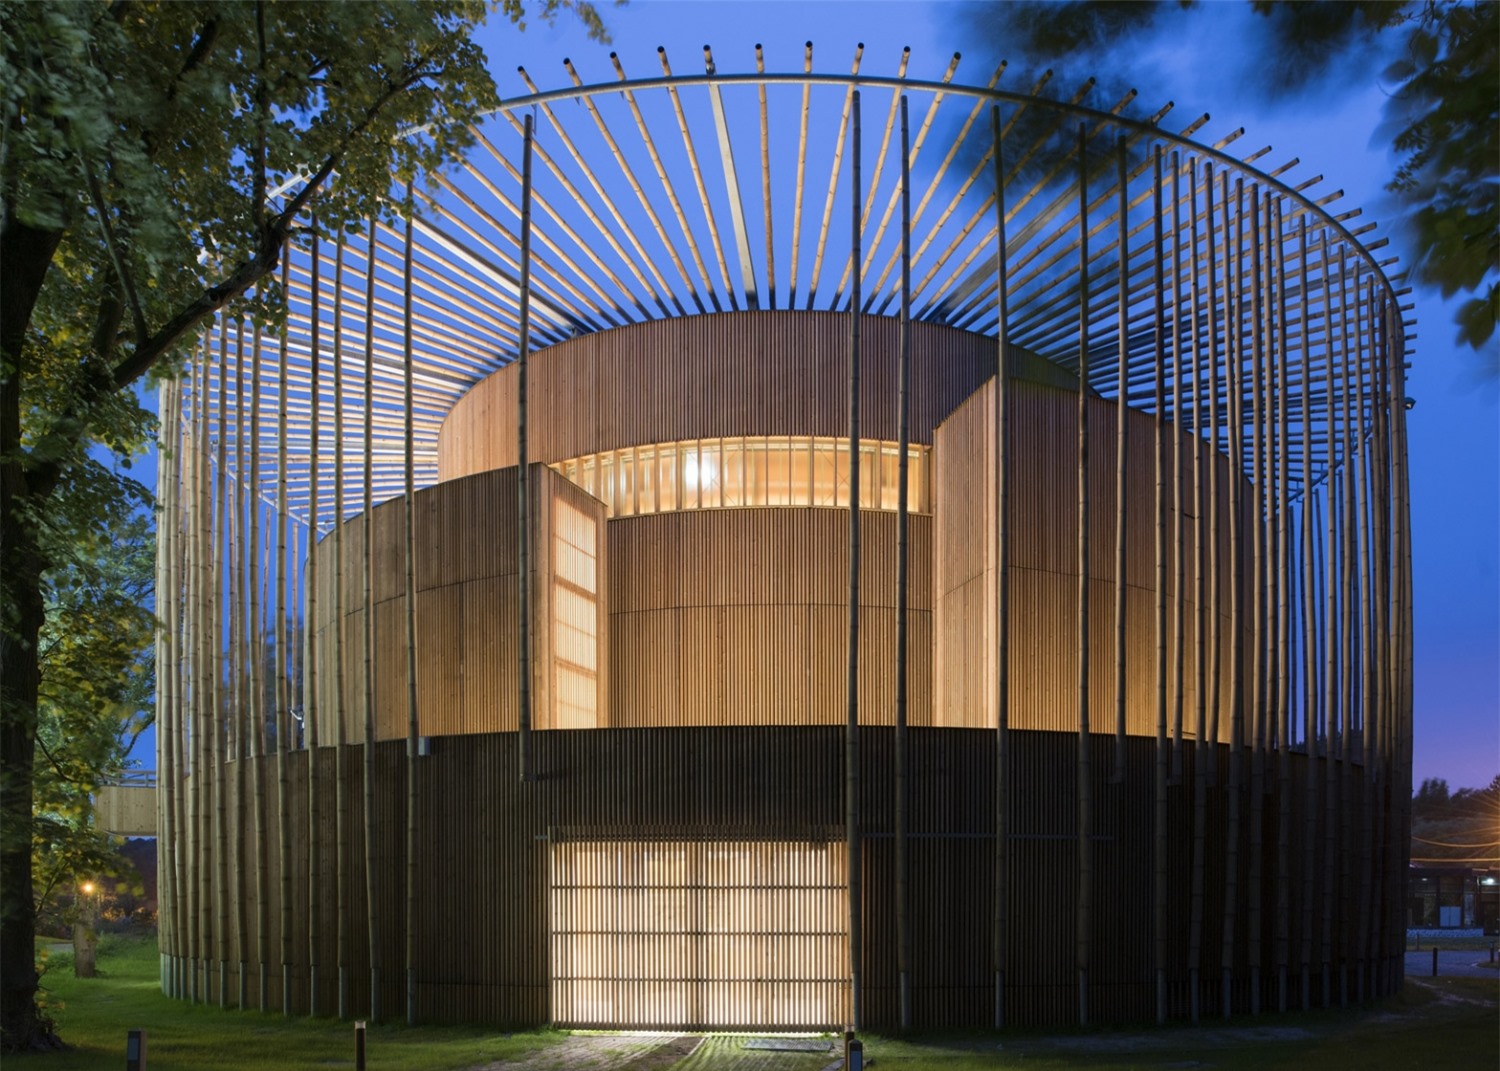 6 world famous bamboo architectures - Photo 12.